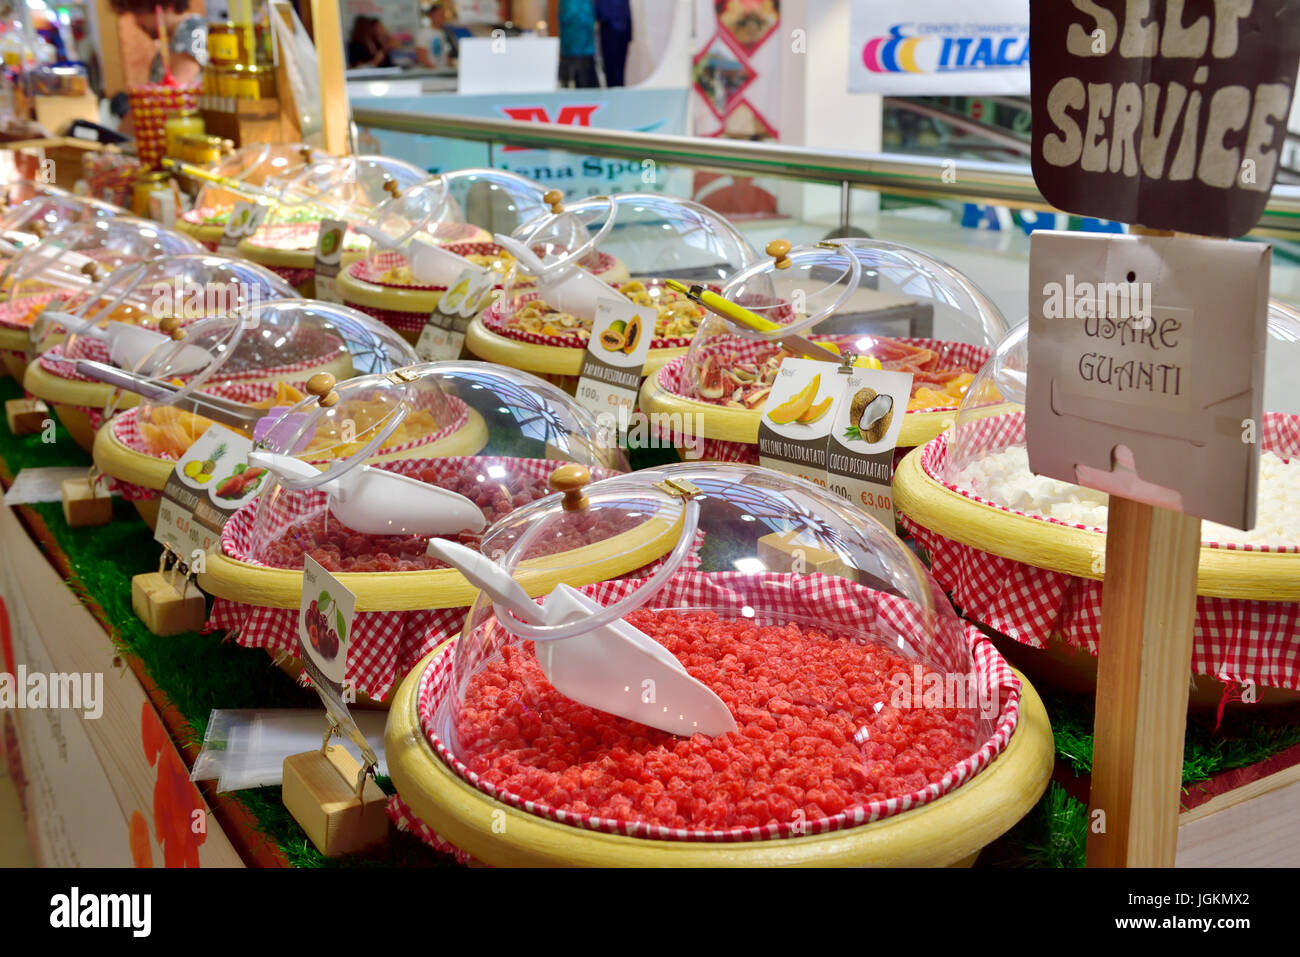 Display selling traditional sugar gum sweets Stock Photo